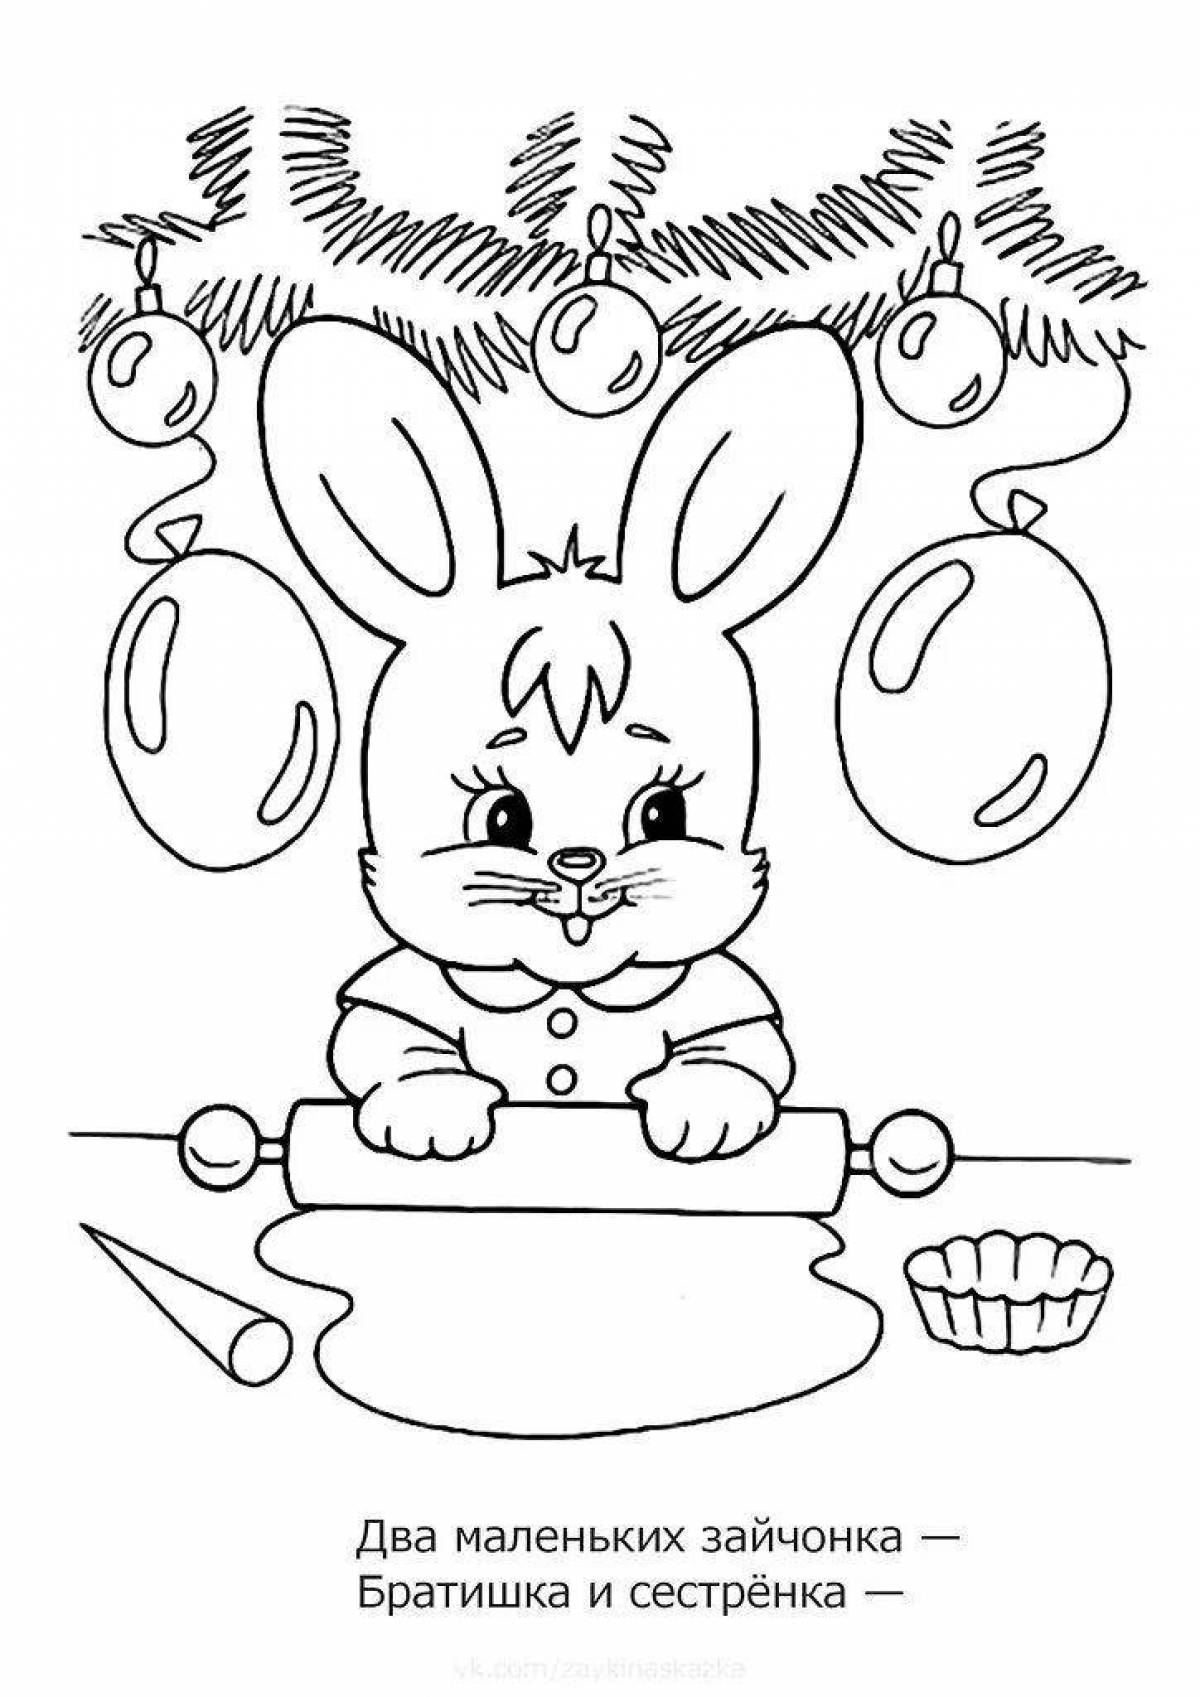 New Year's drawing hare #2